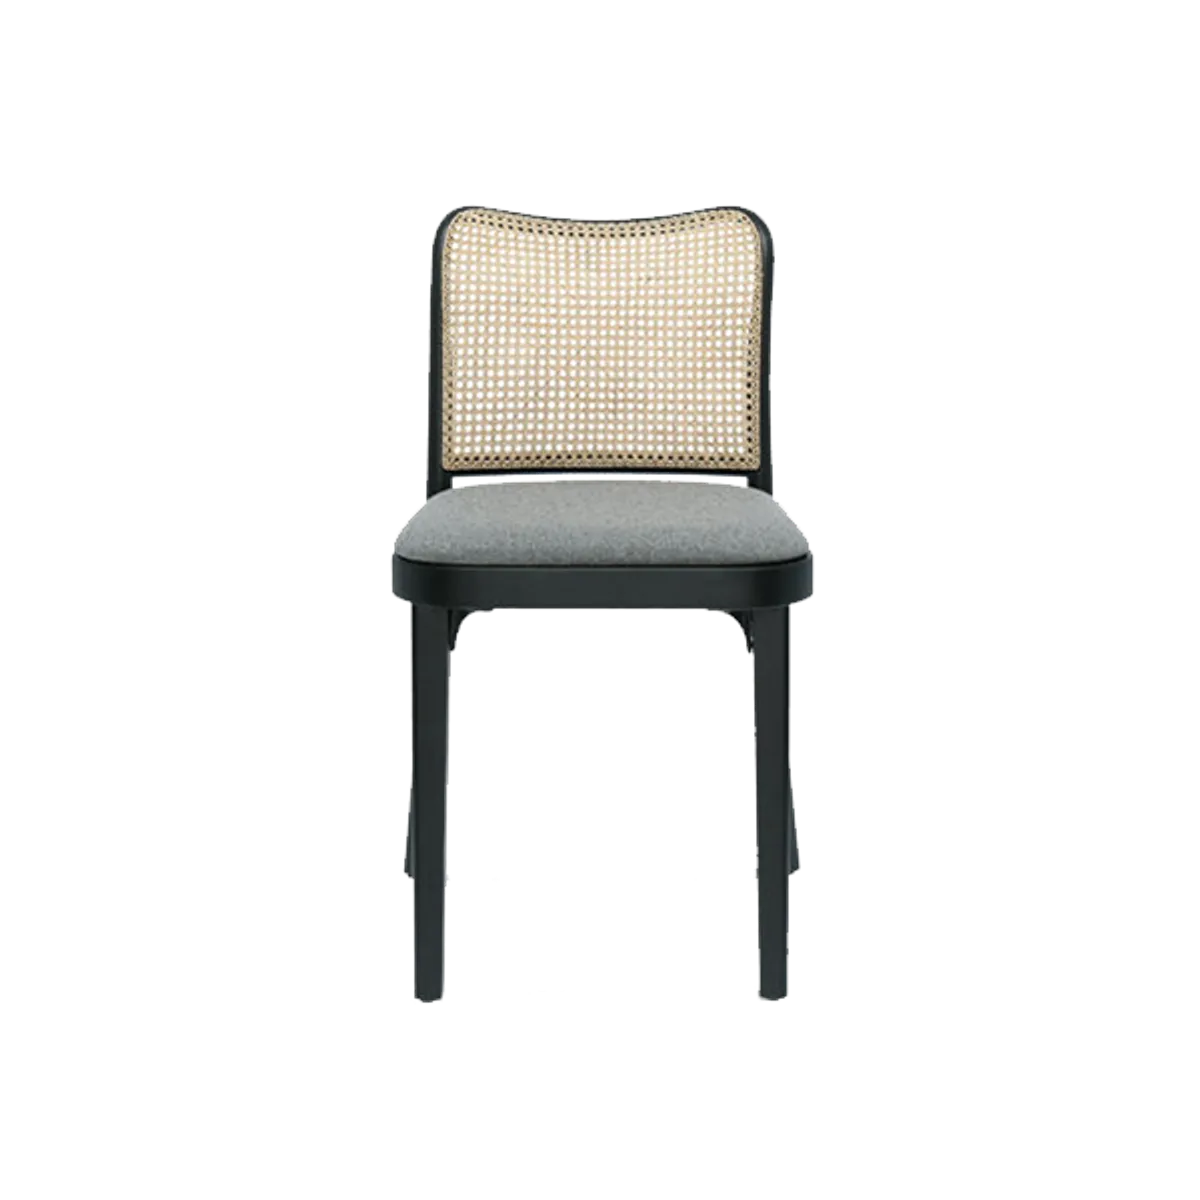 Wentworth Soft Side Chair Cane Inside Out Contracts